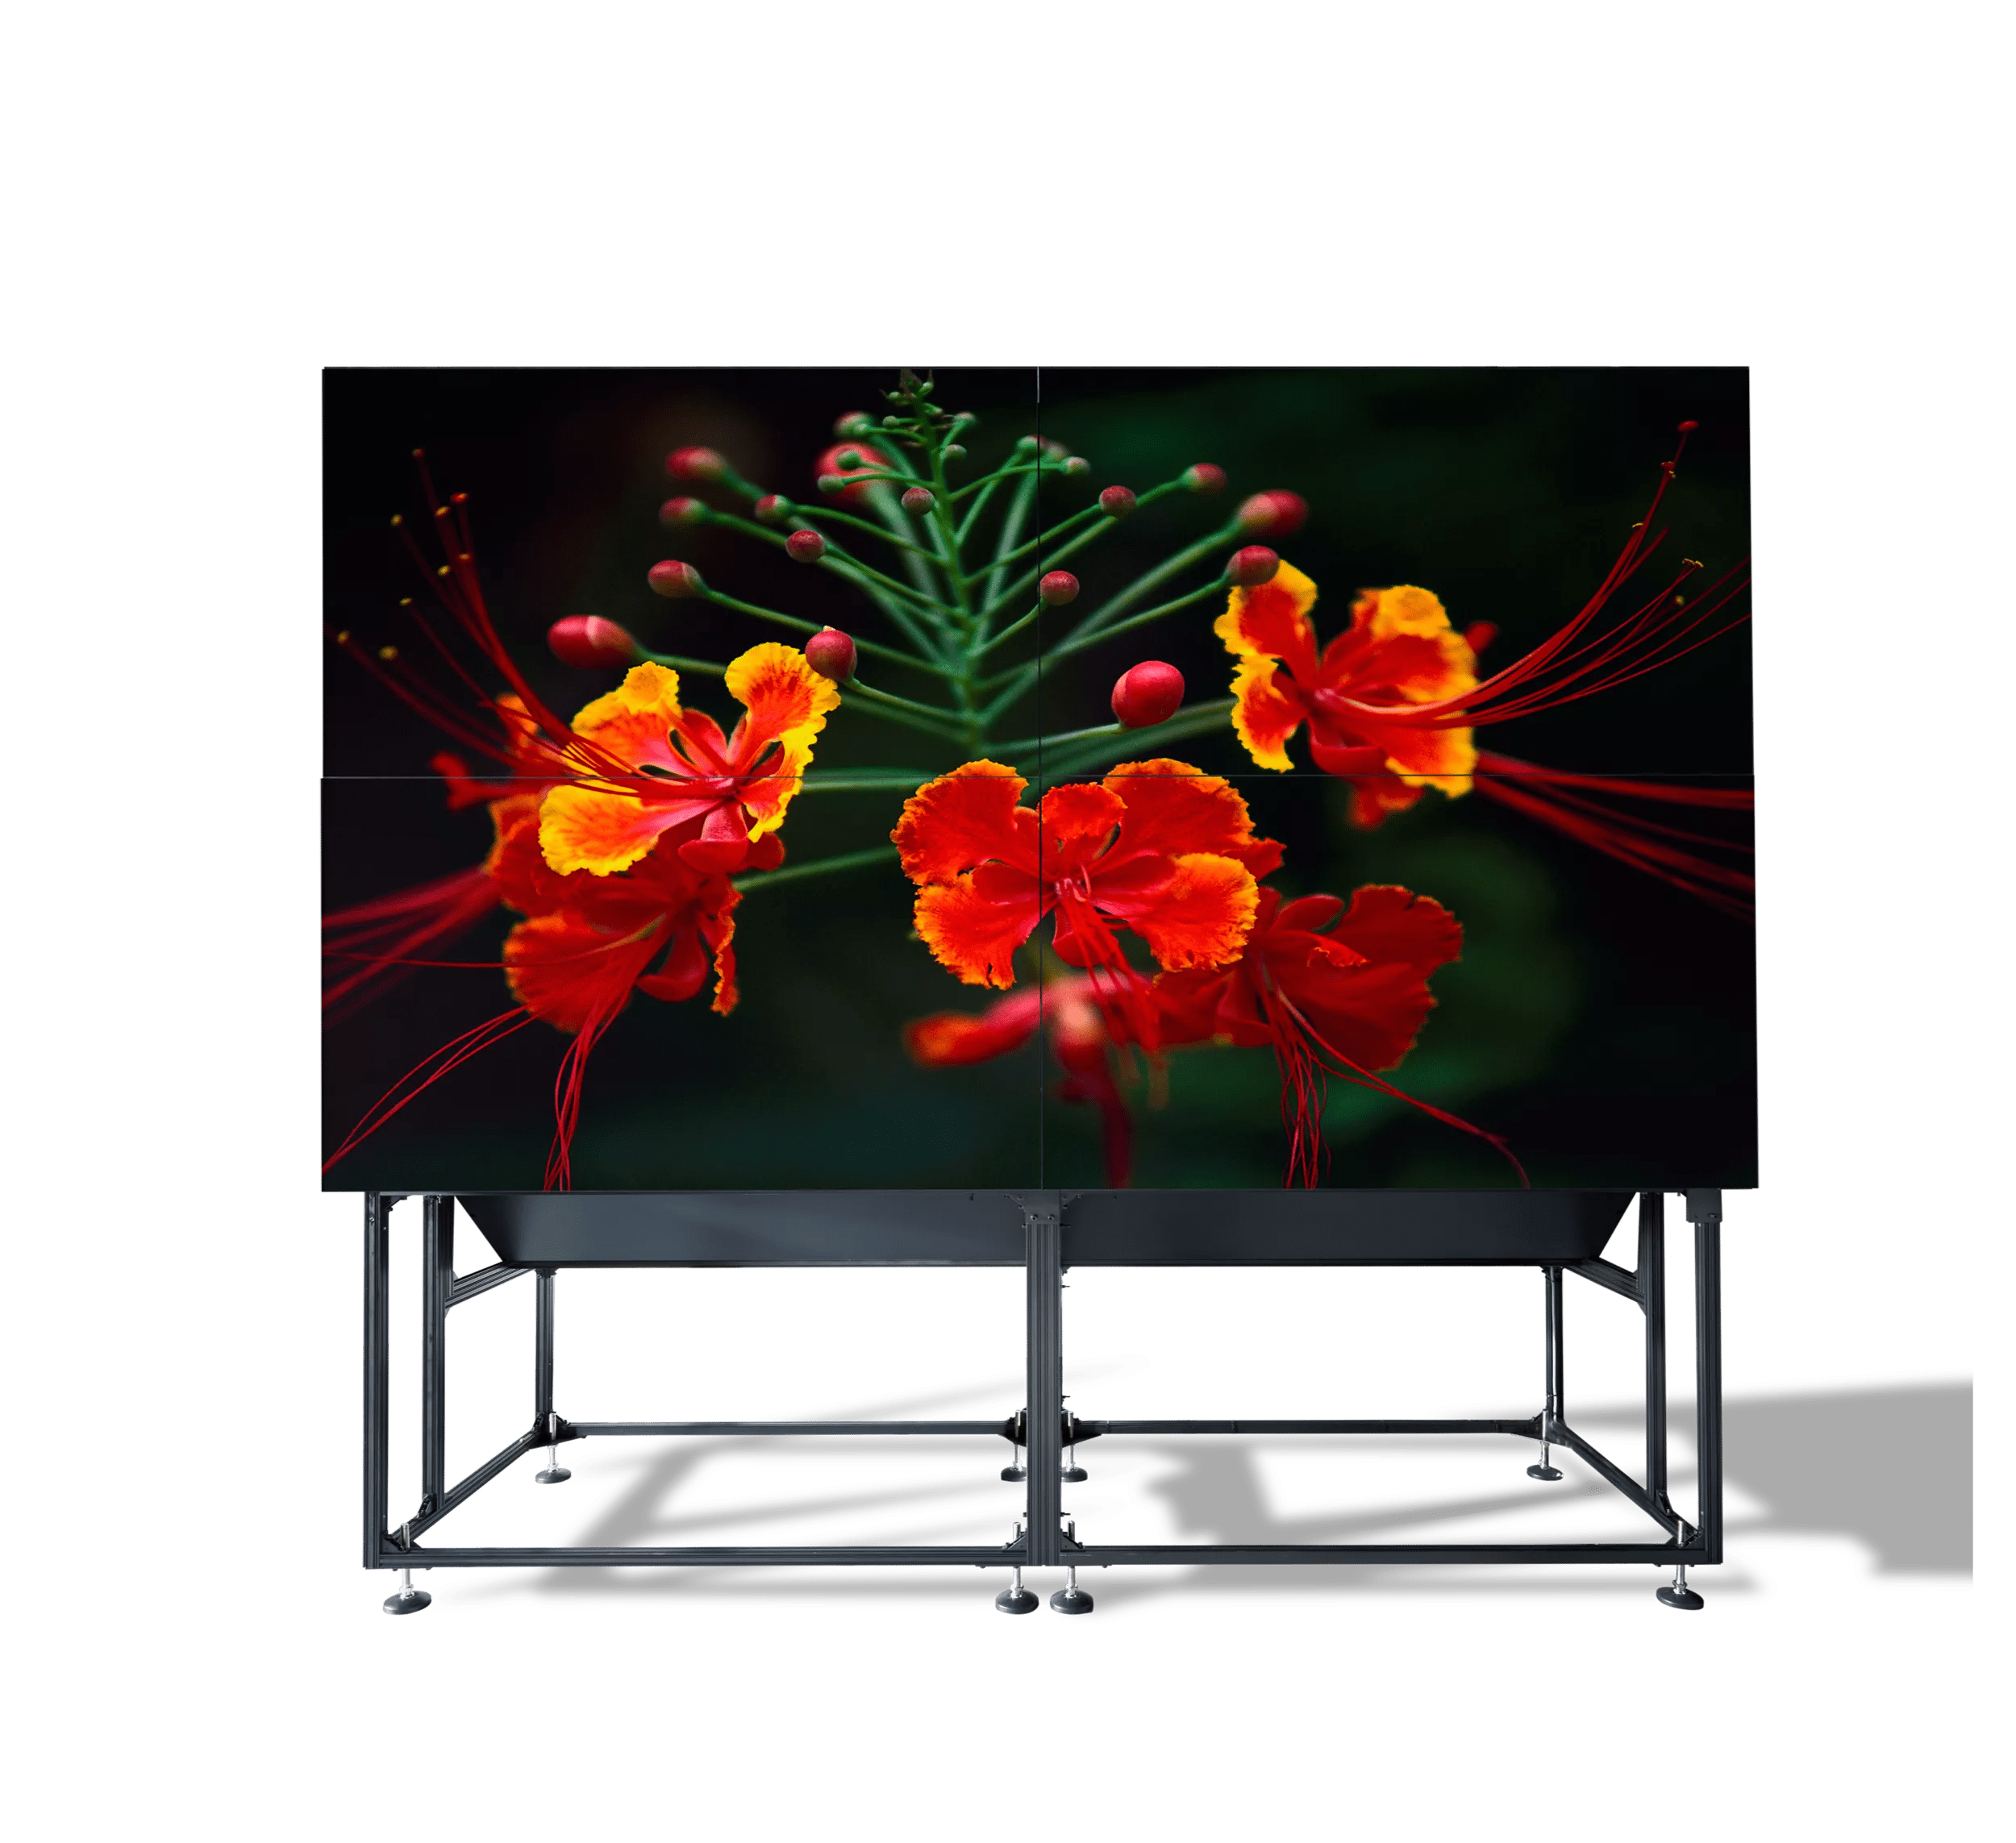 Barco releases two new full HD LED-lit video wall modules - Barco